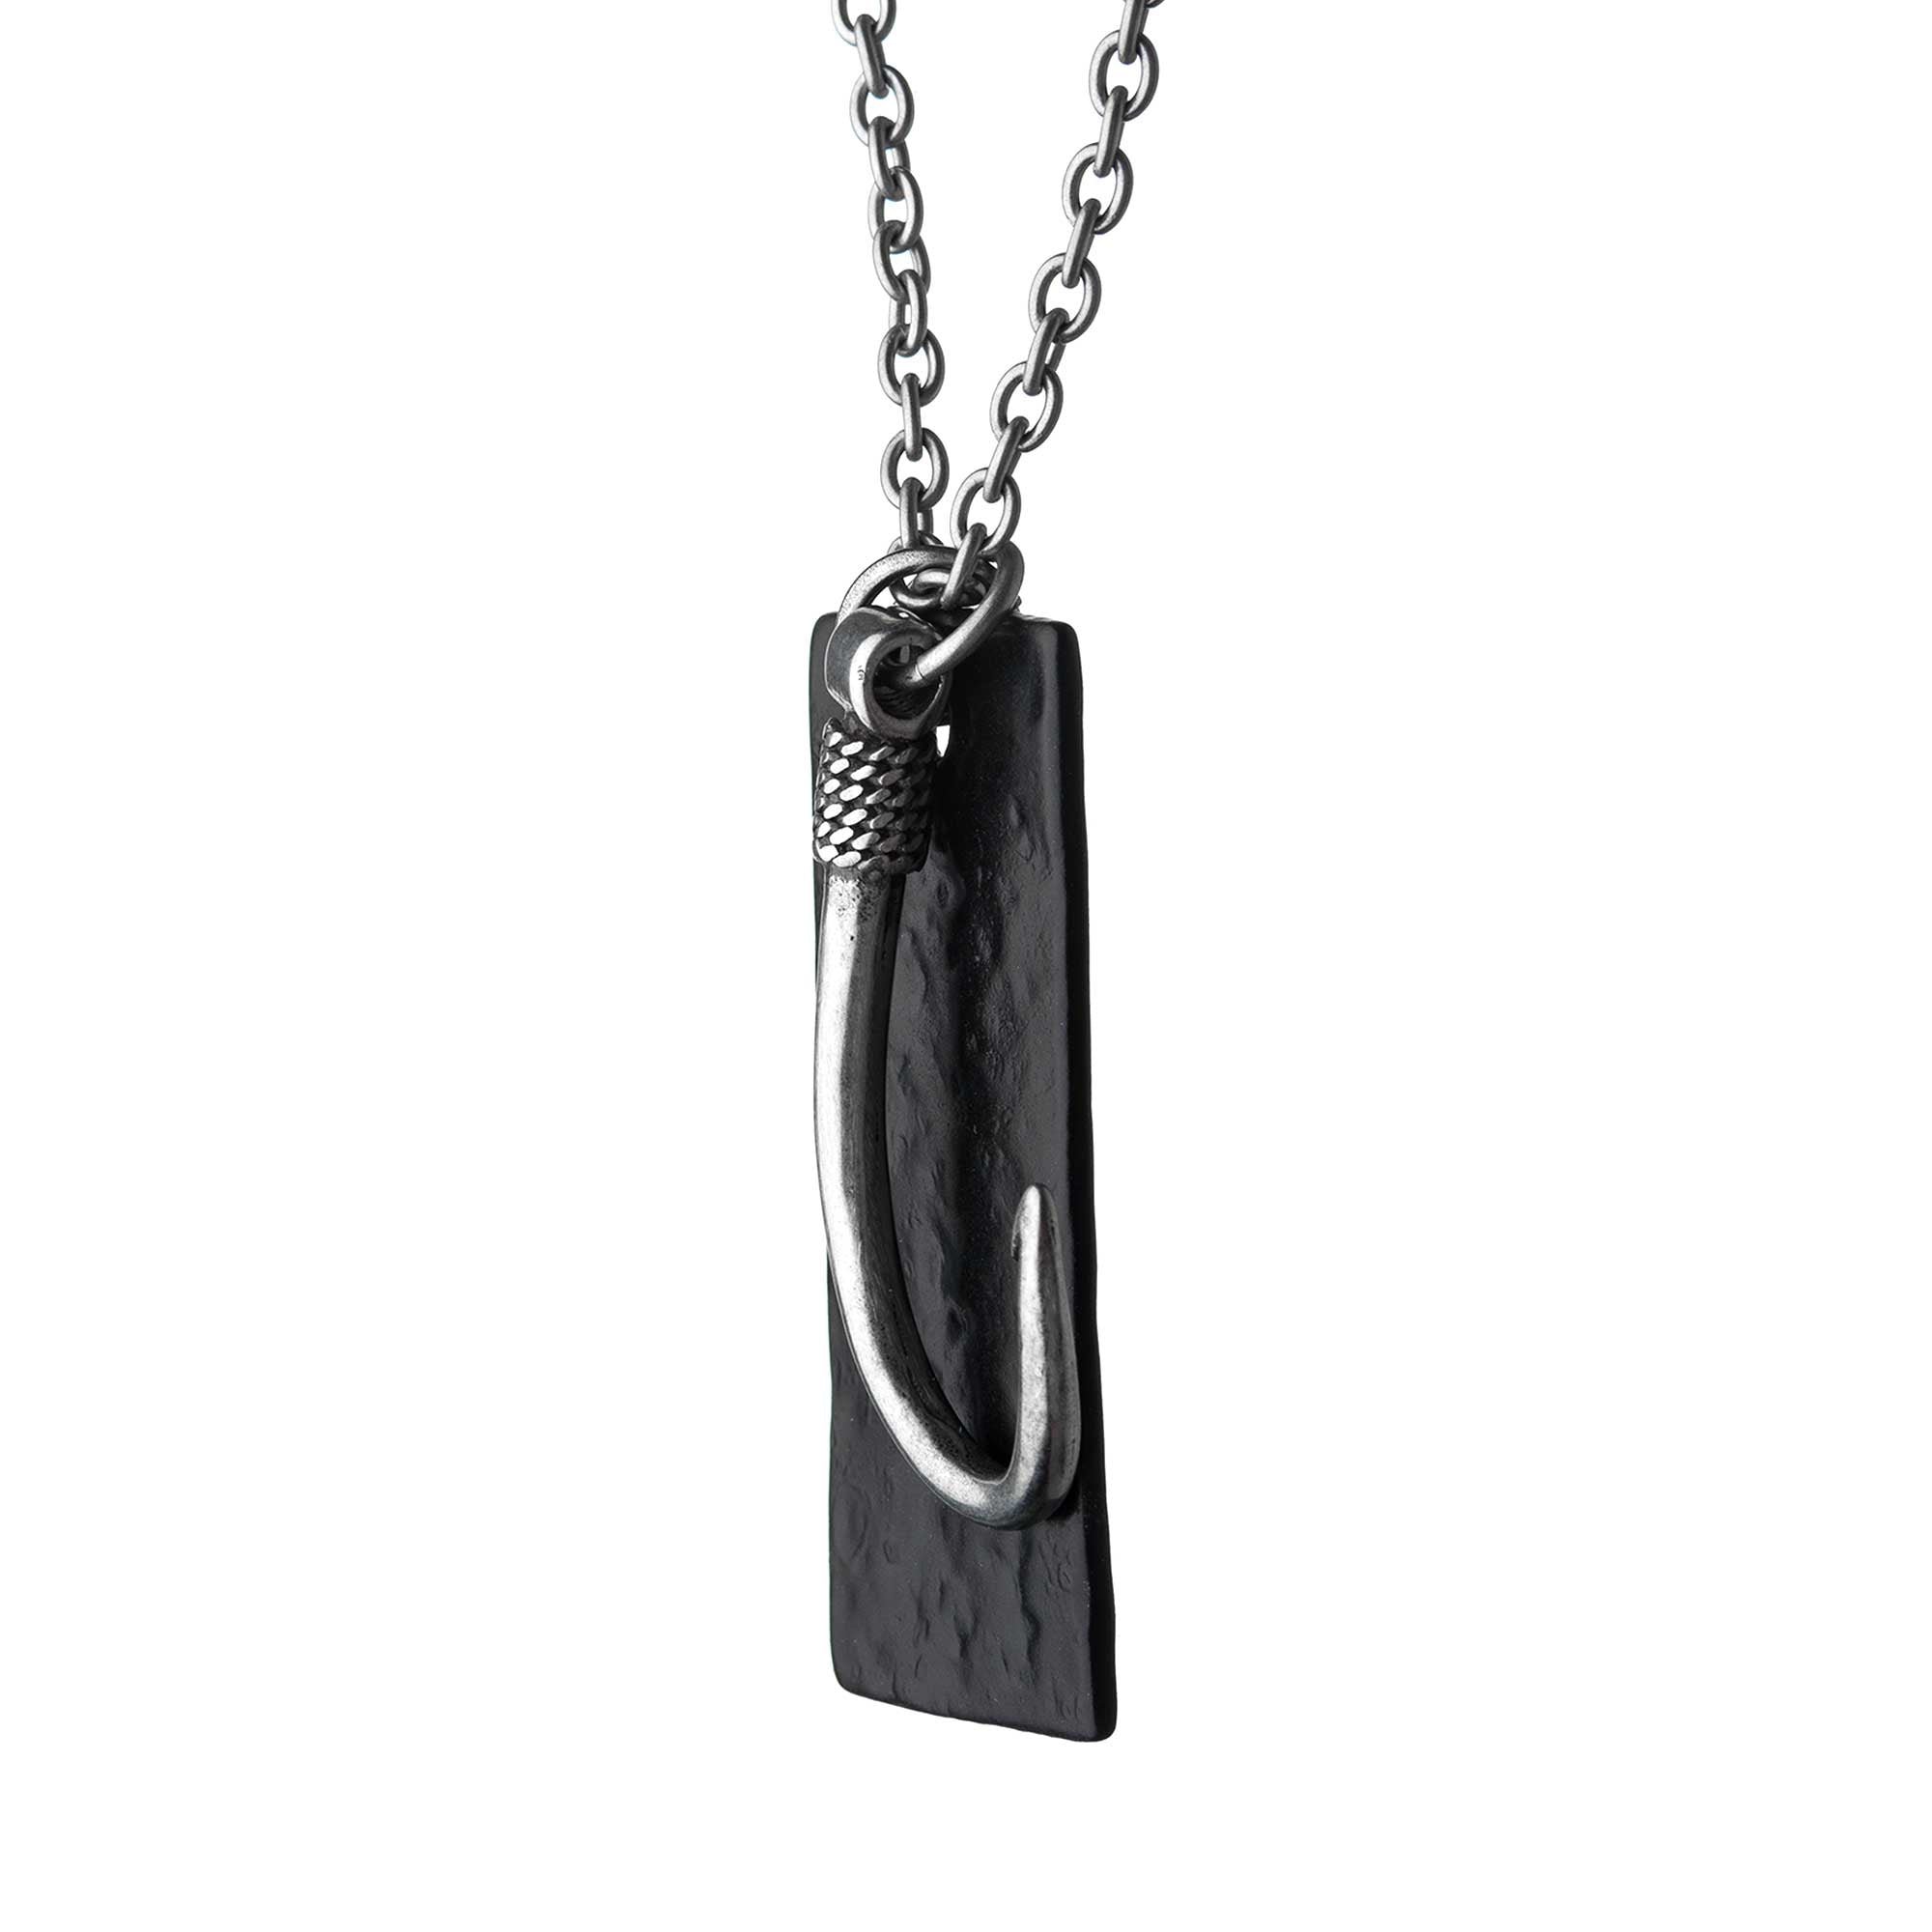 Stainless Steel Antiqued Finish Fish Hook and Black Leather Tag Pendant with chain